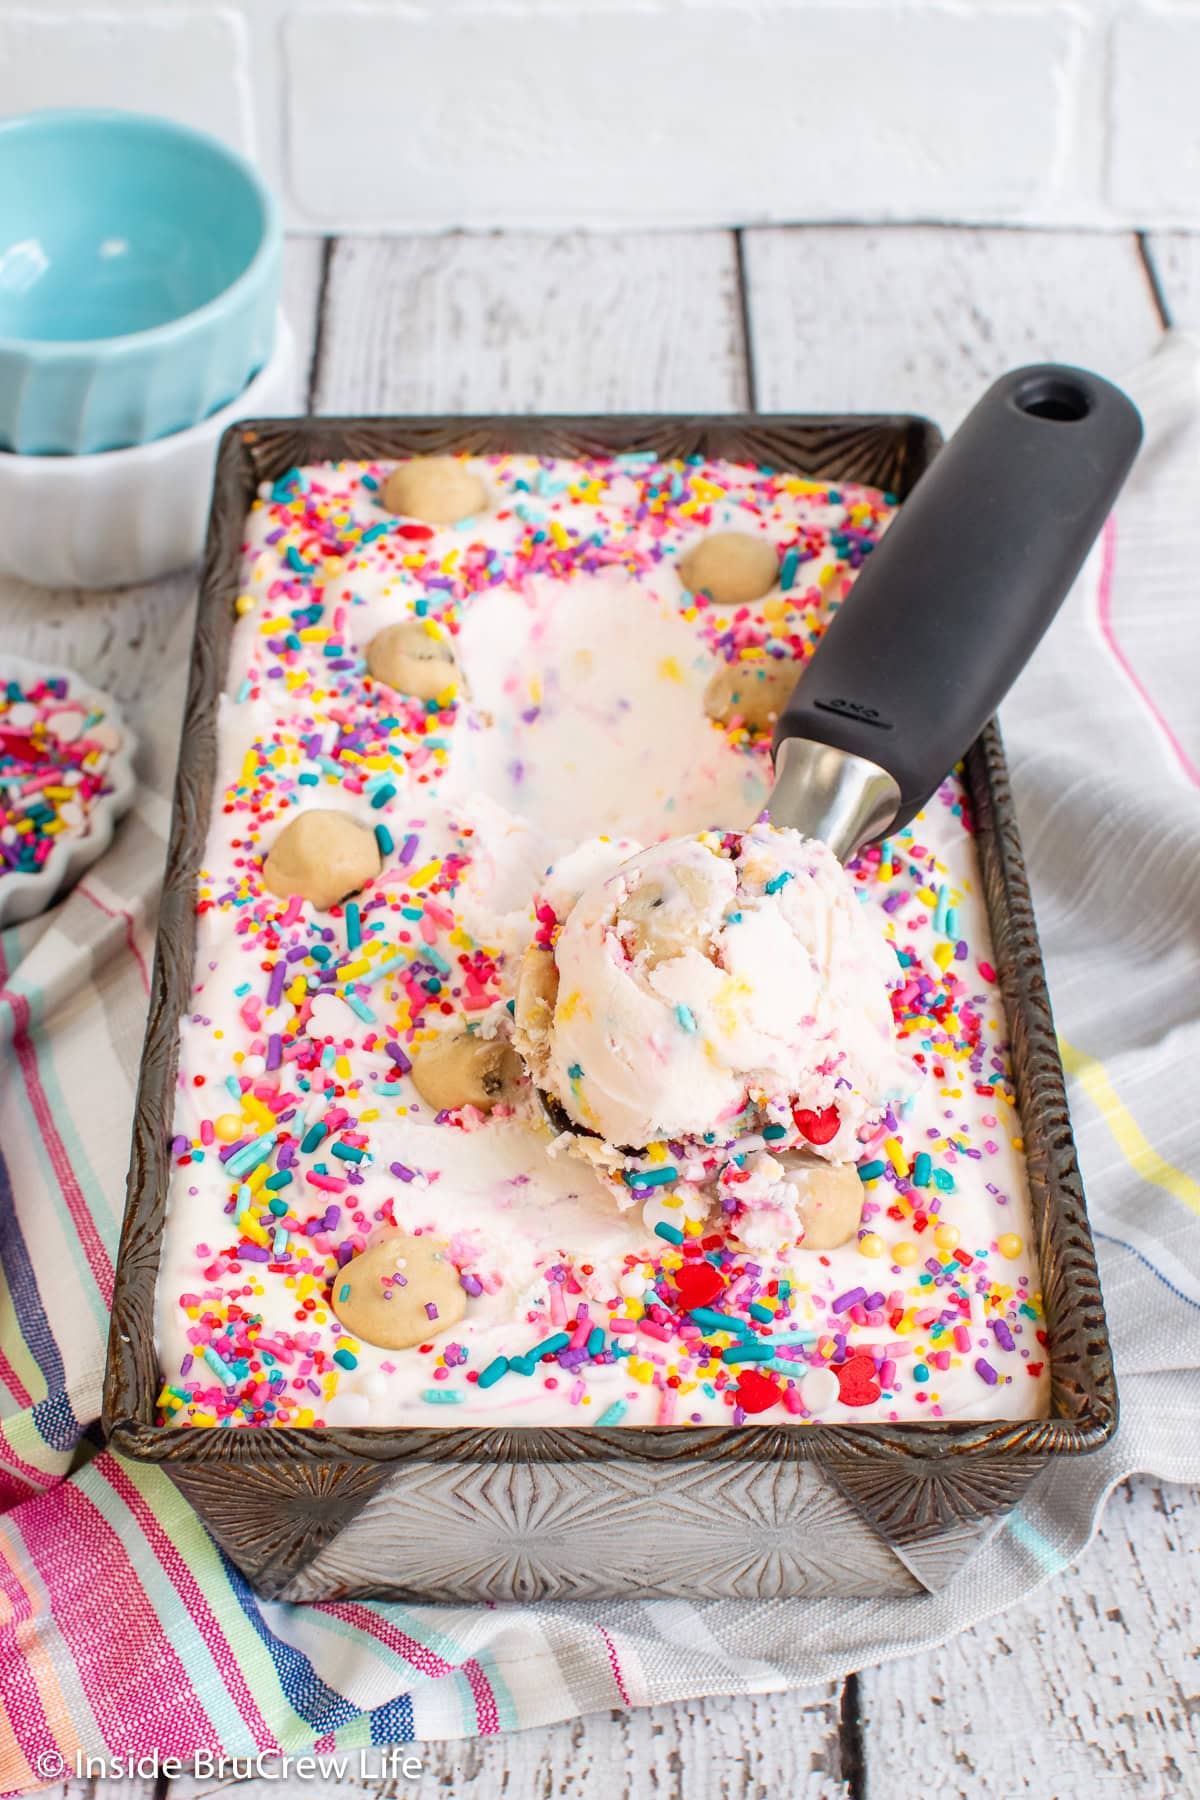 A pan filled with confetti ice cream and a scoop in it.